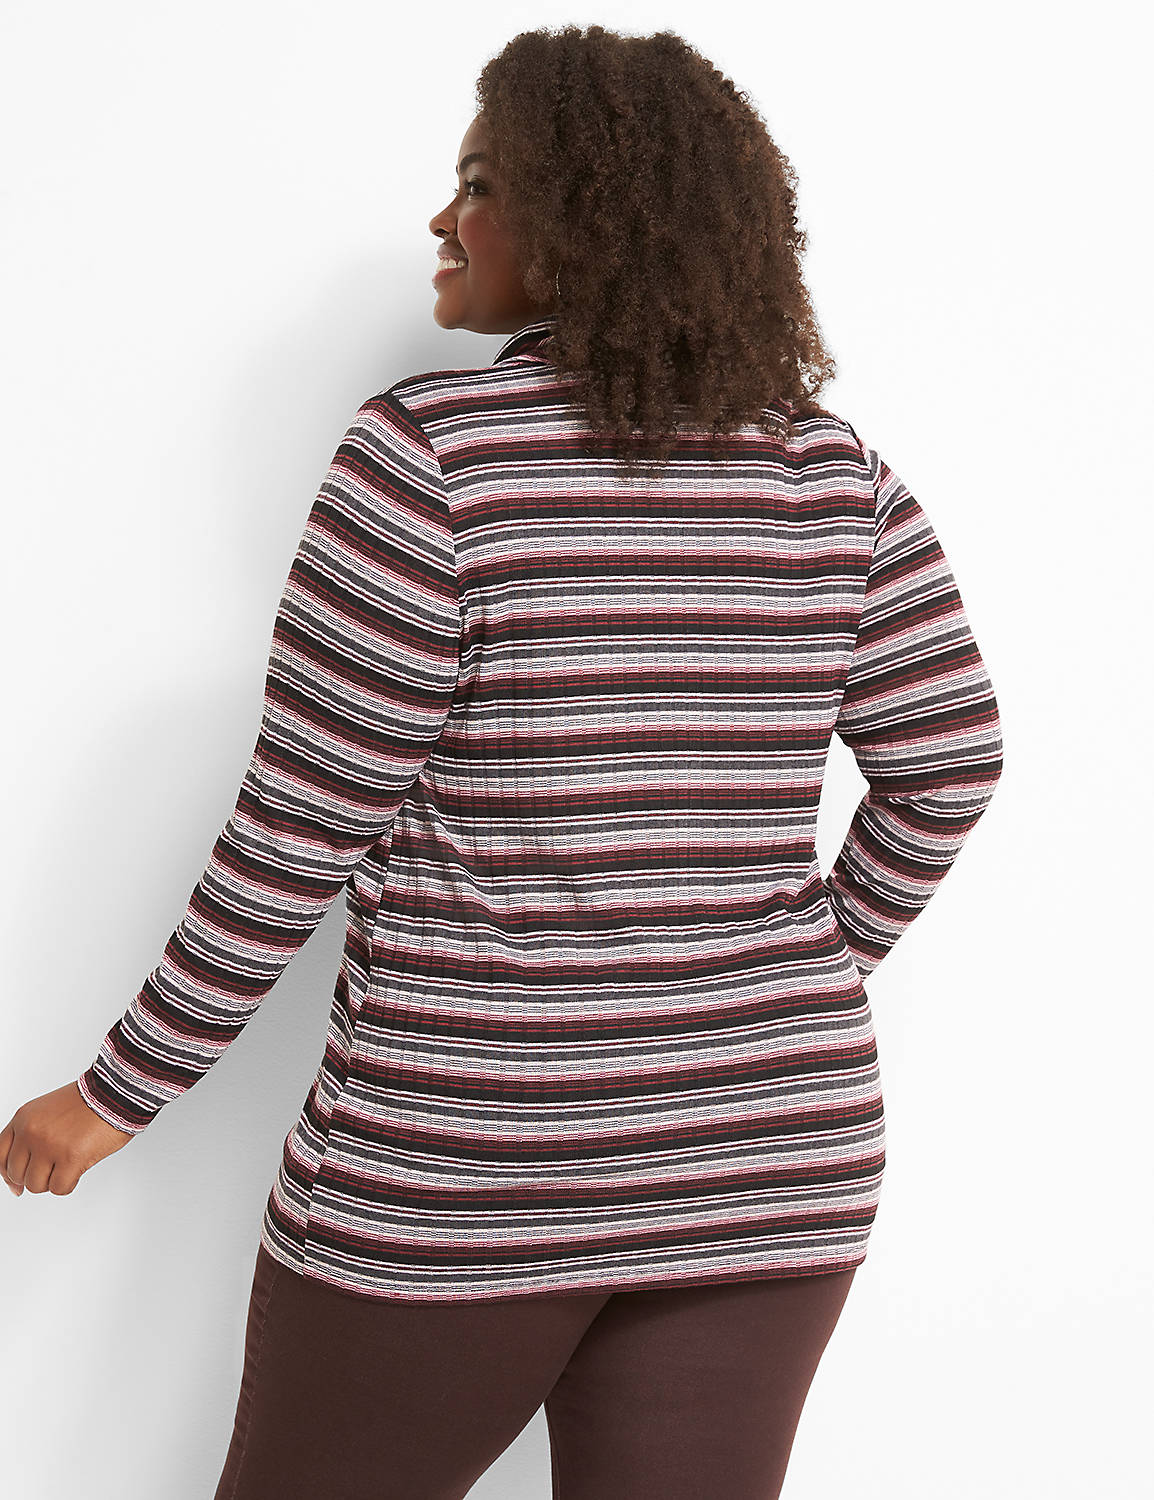 Long Sleeve Cowl Neck Knit Top In Rib Stripe 1123026:Stripe:10/12 Product Image 2